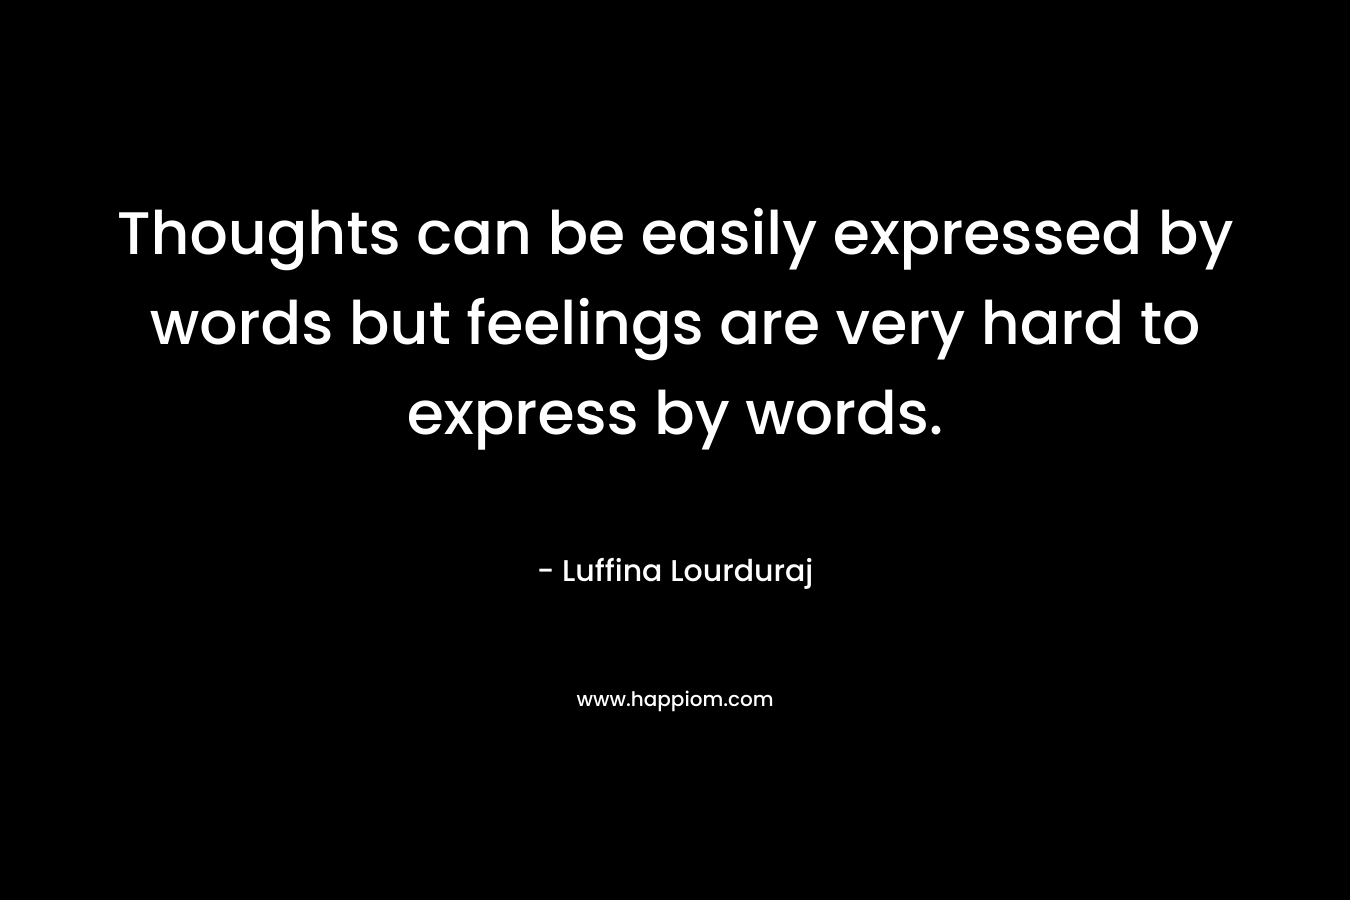 Thoughts can be easily expressed by words but feelings are very hard to express by words.